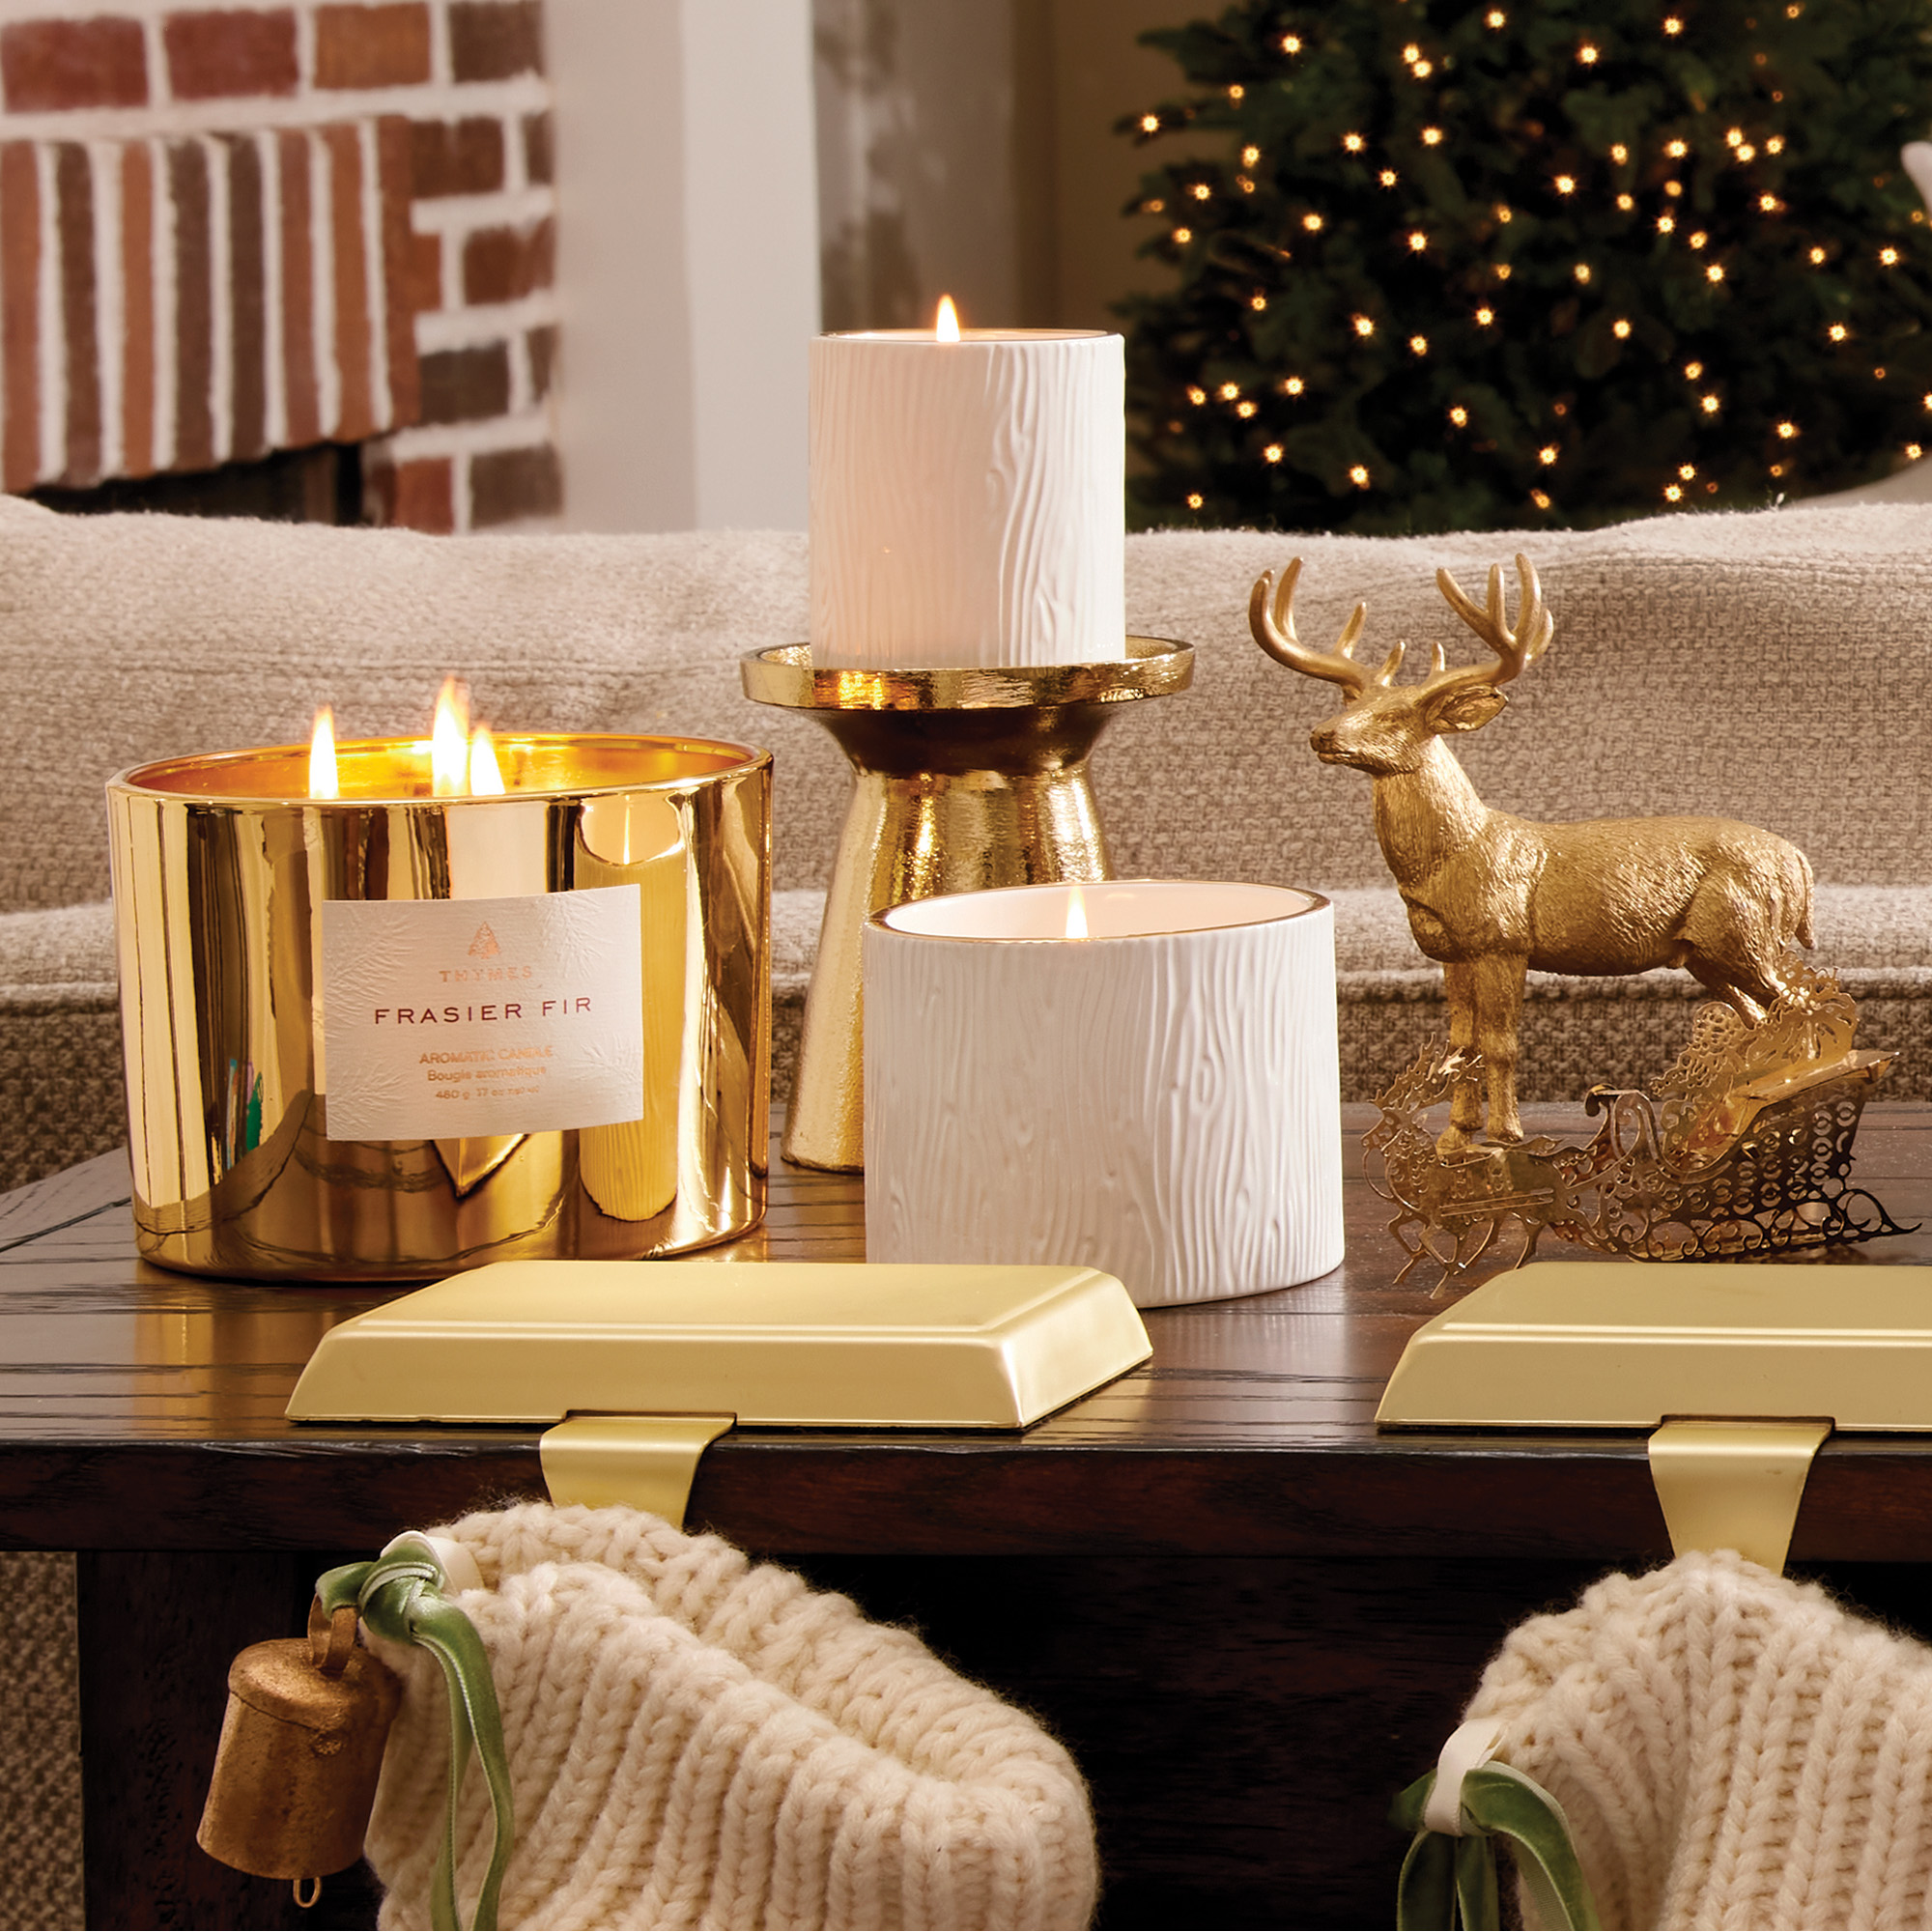 Thymes - Gold 3-Wick Candle - Frasier Fir